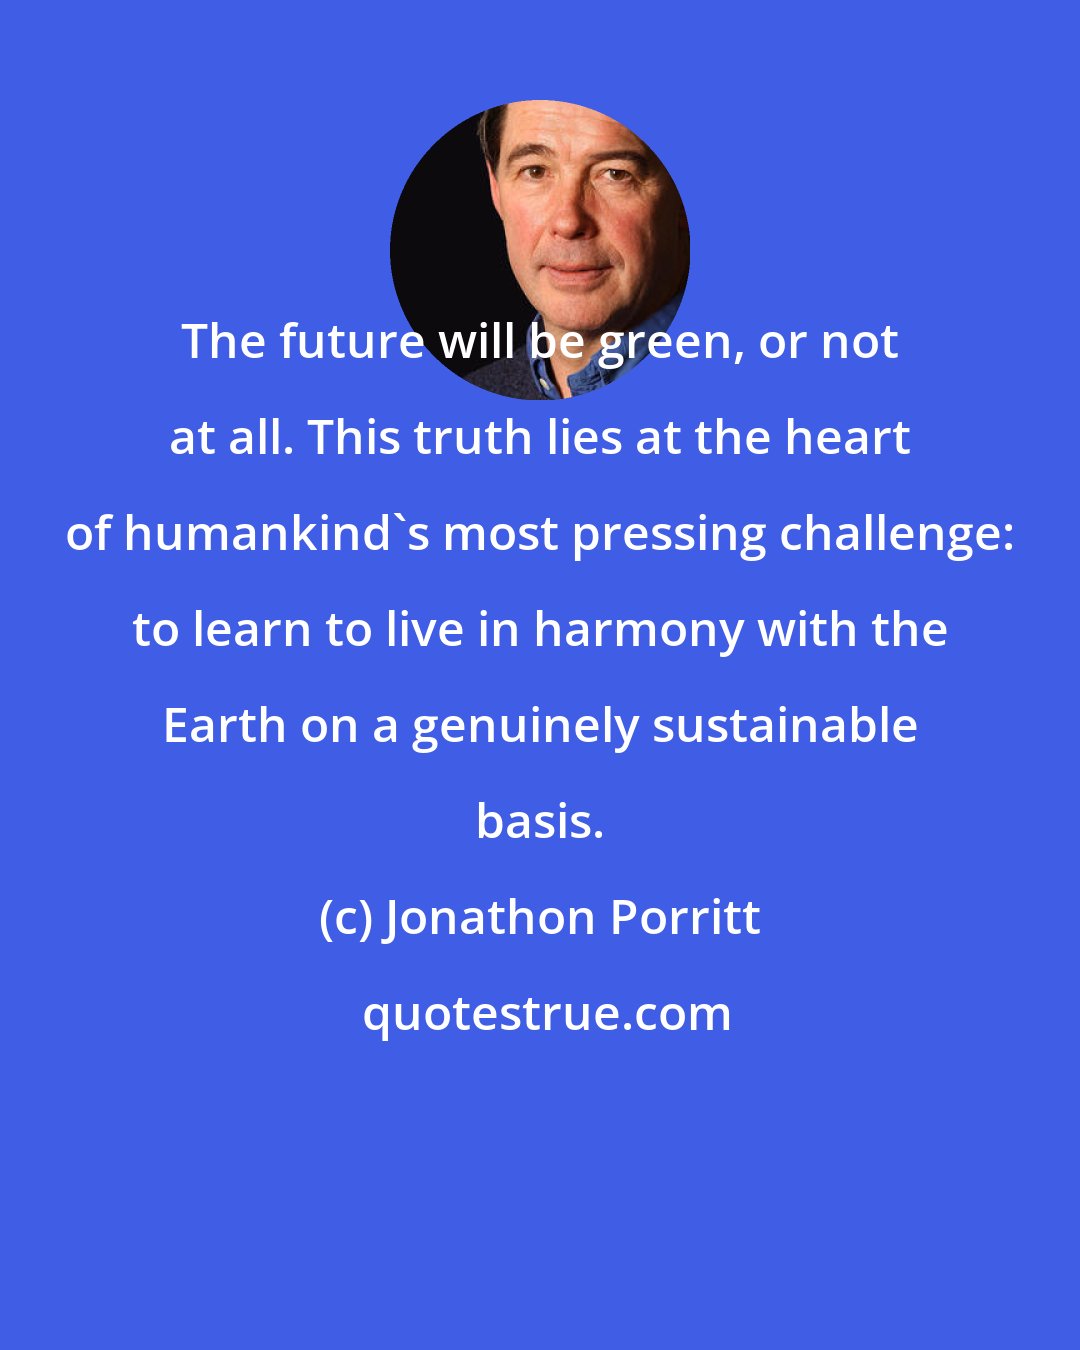 Jonathon Porritt: The future will be green, or not at all. This truth lies at the heart of humankind's most pressing challenge: to learn to live in harmony with the Earth on a genuinely sustainable basis.